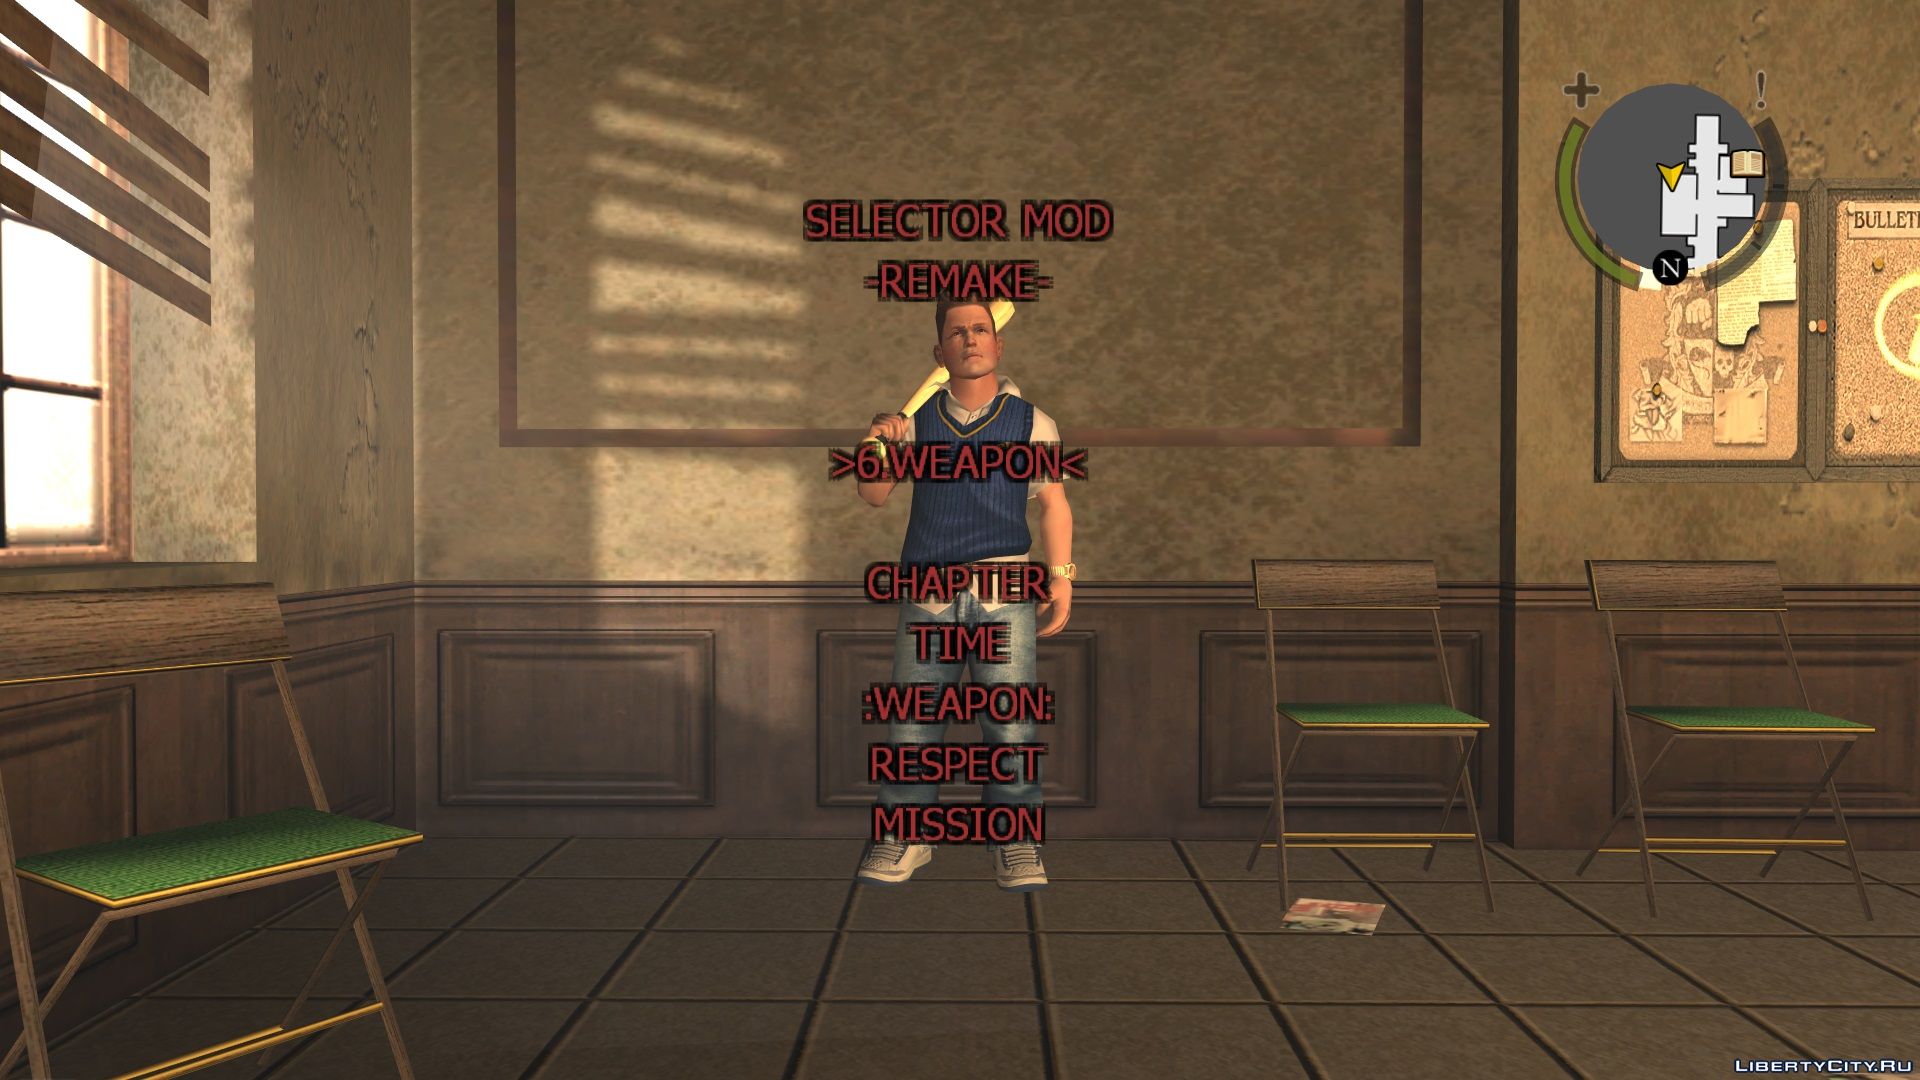 Hot Coffee mod For Bully: Anniversary Edition Mods